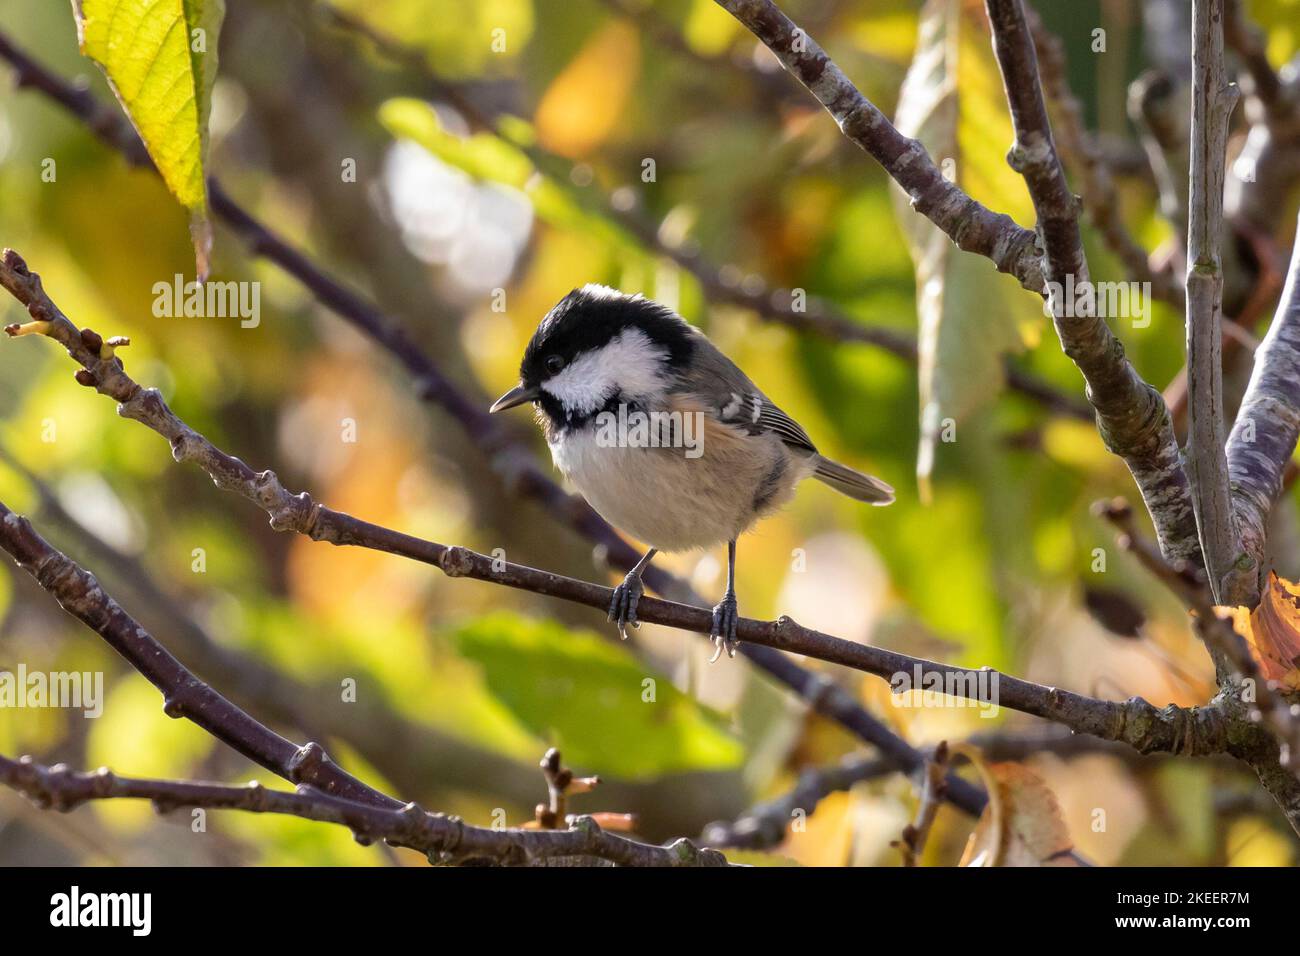 Coal tit (Periparus ater) perched in a tree, Sussex, UK Stock Photo